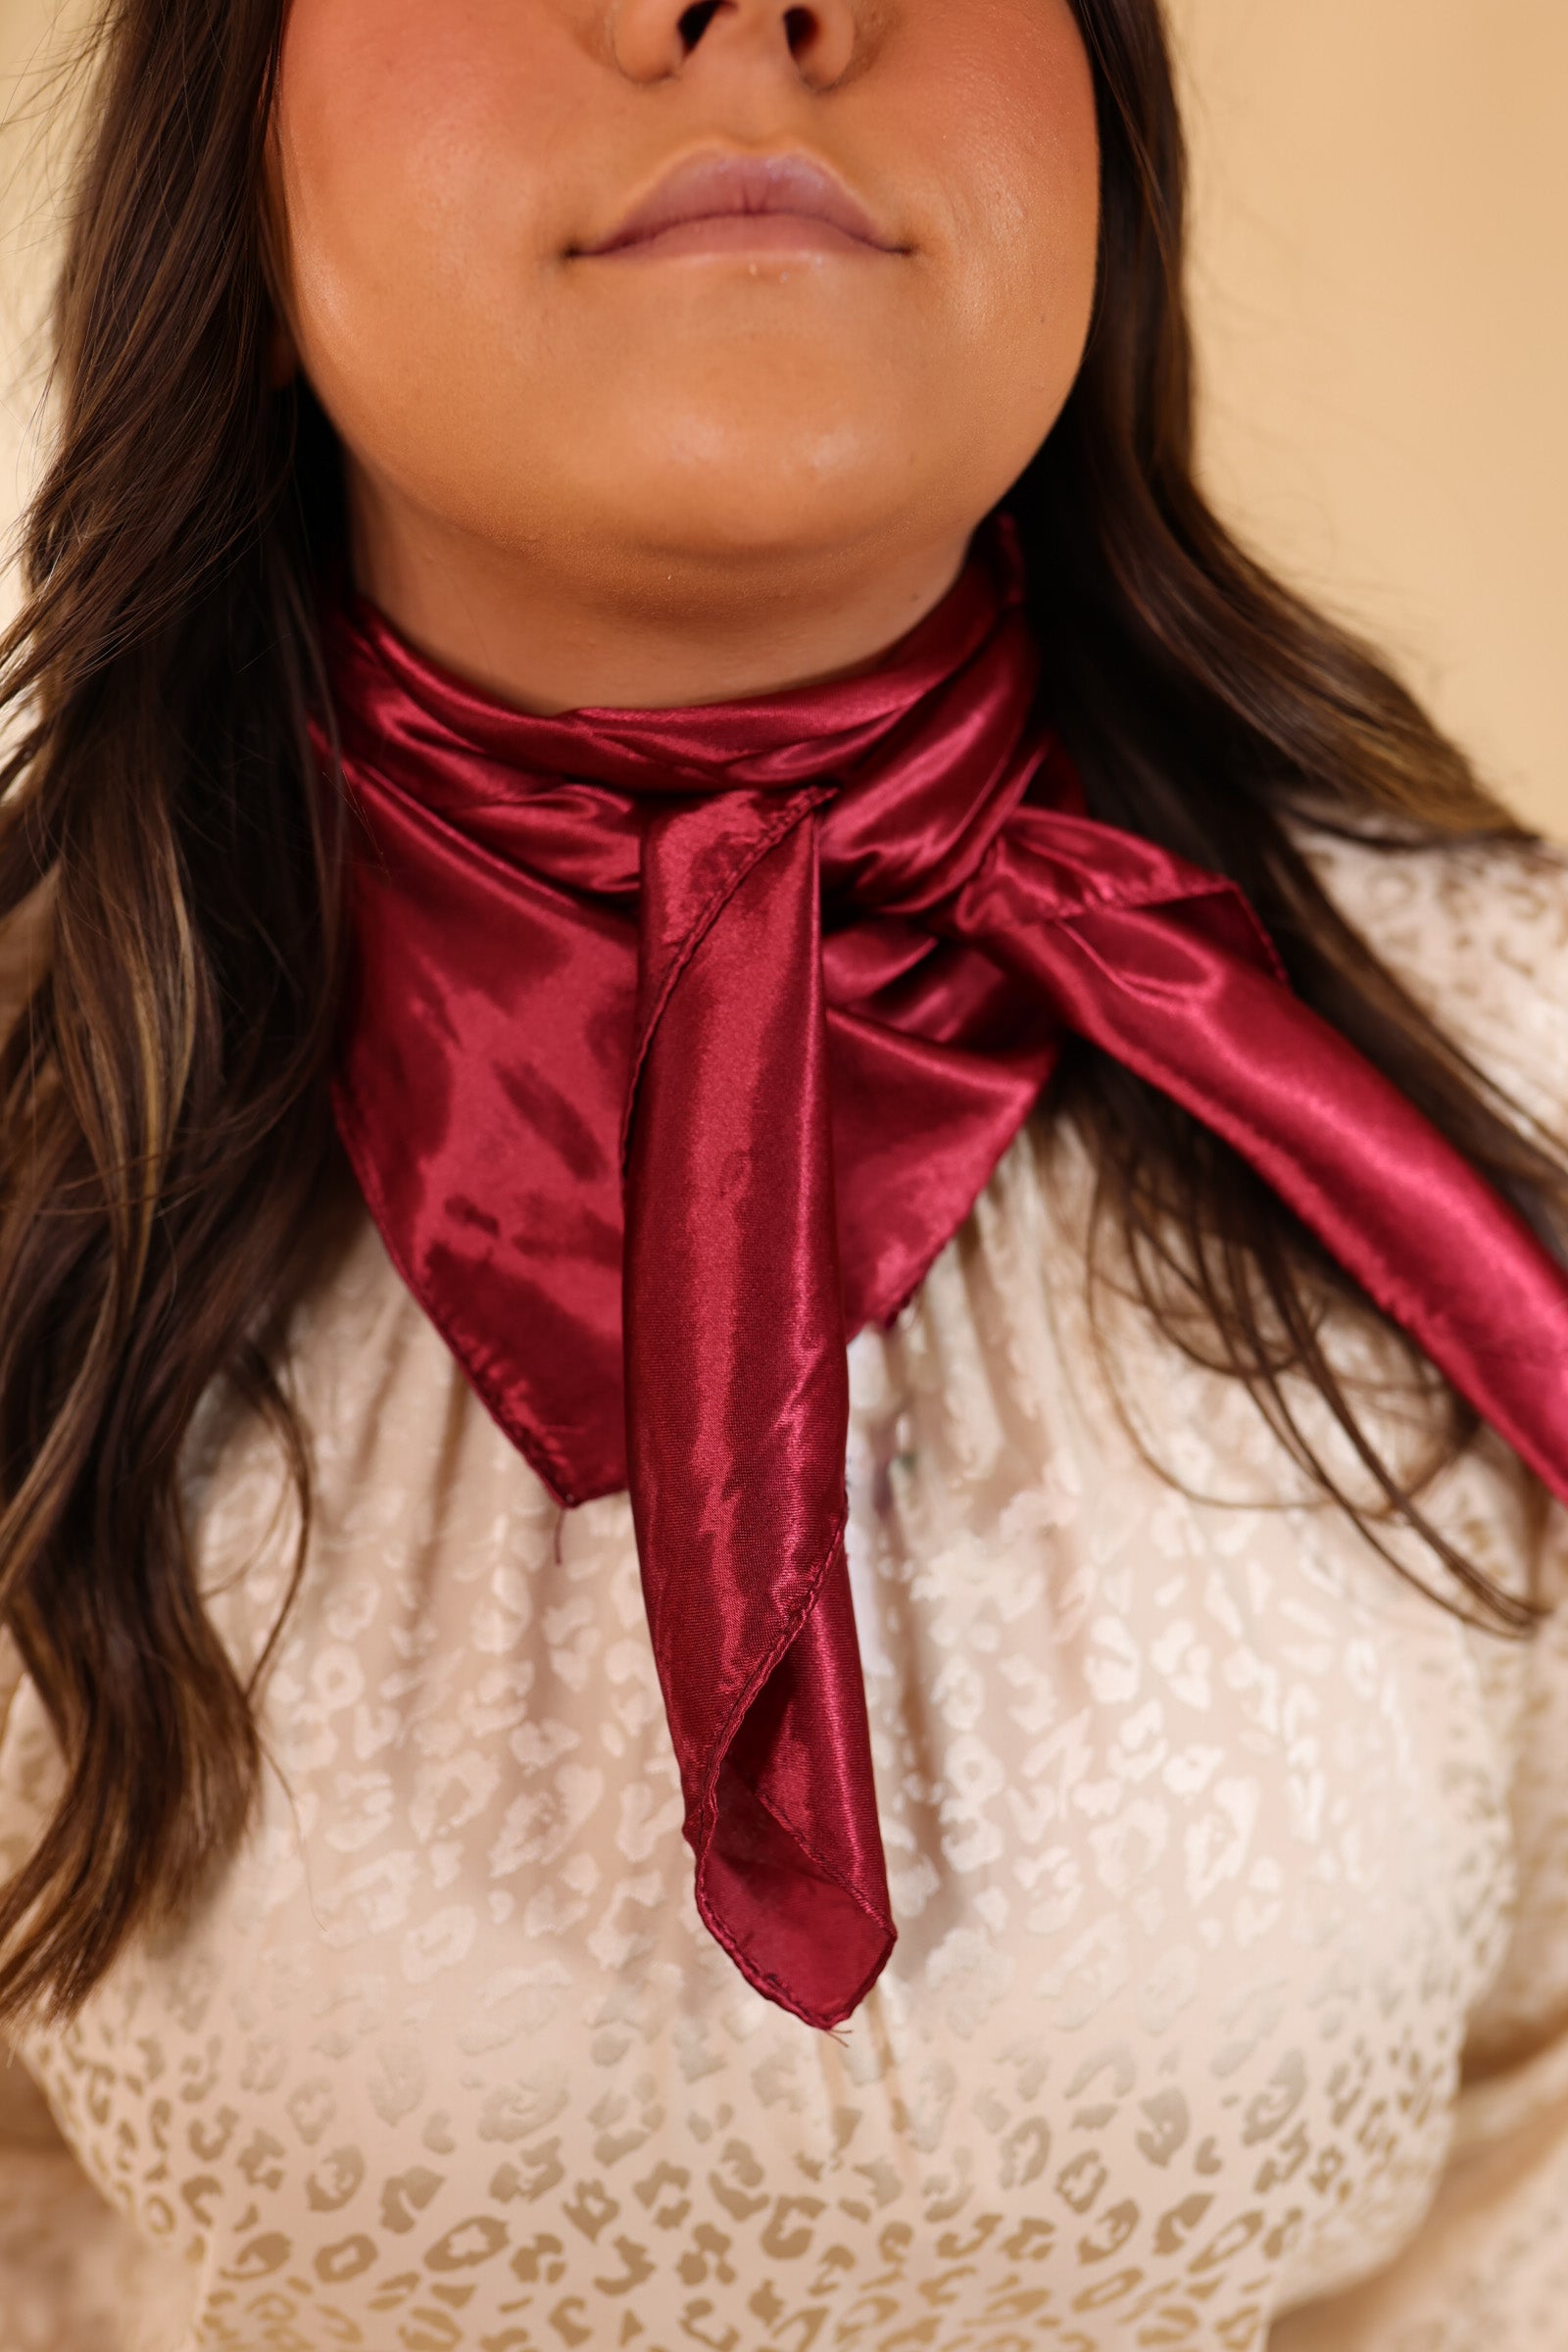 Solid Colored Scarf in Bula Burgundy - Giddy Up Glamour Boutique